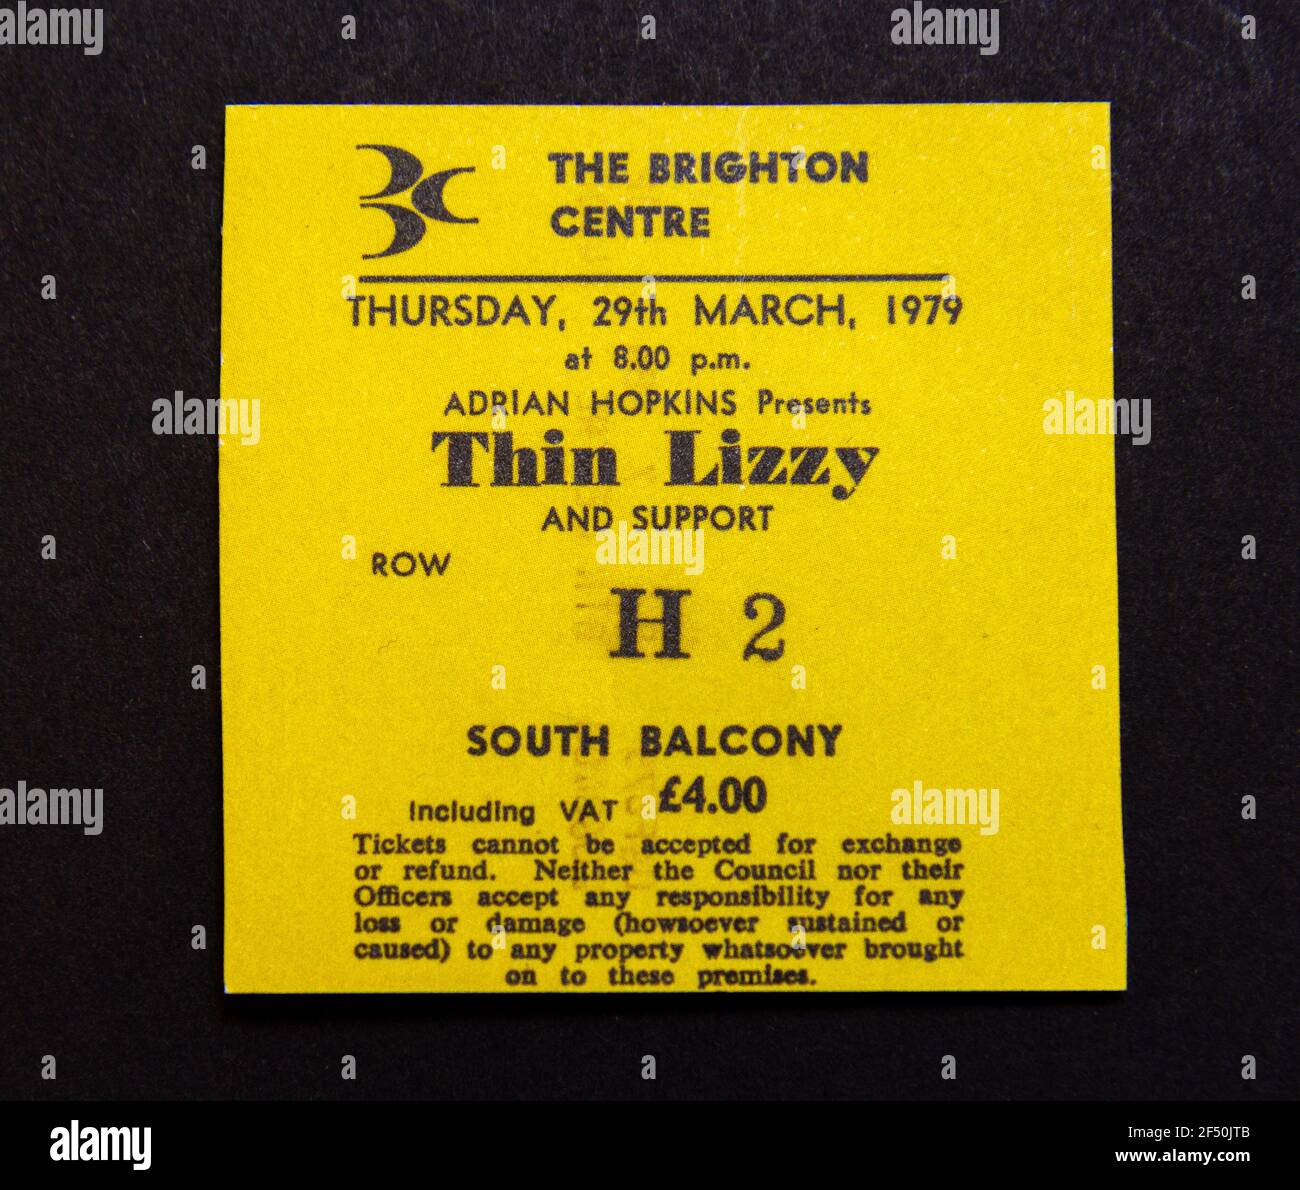 A replica concert ticket for Thin Lizzy at the Brighton Centre, on 29th March 1979, part of a school 1970s Childhood memorabilia pack. Stock Photo